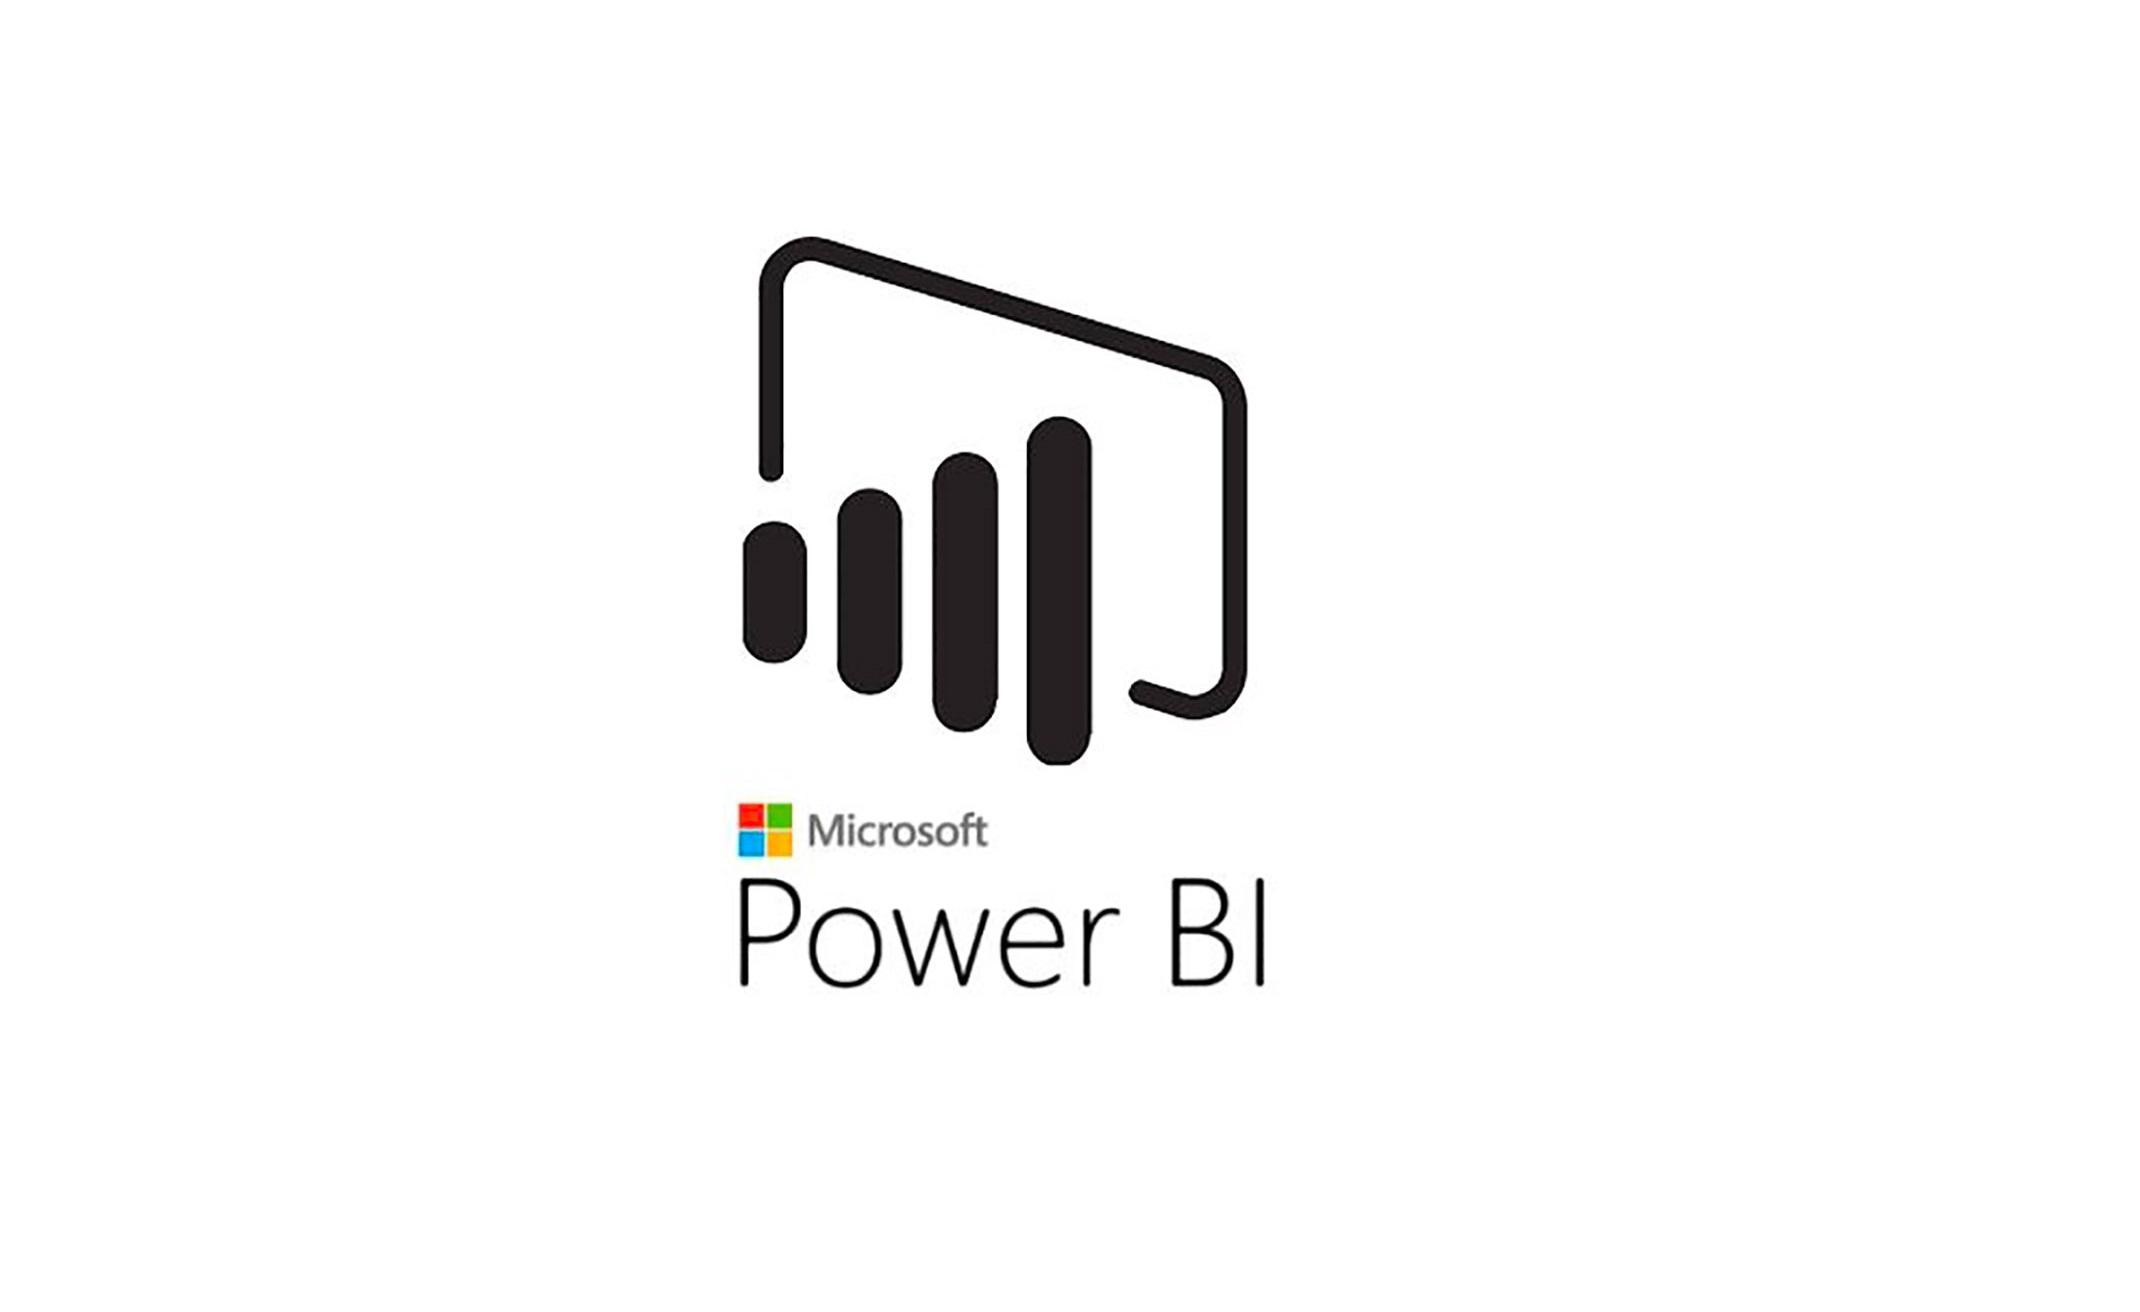 Microsoft Power BI Training in Corvallis | Introduction to Power BI training for beginners | Getting started with Power BI | What is Power BI | January 18, 2020 - February 09, 2020